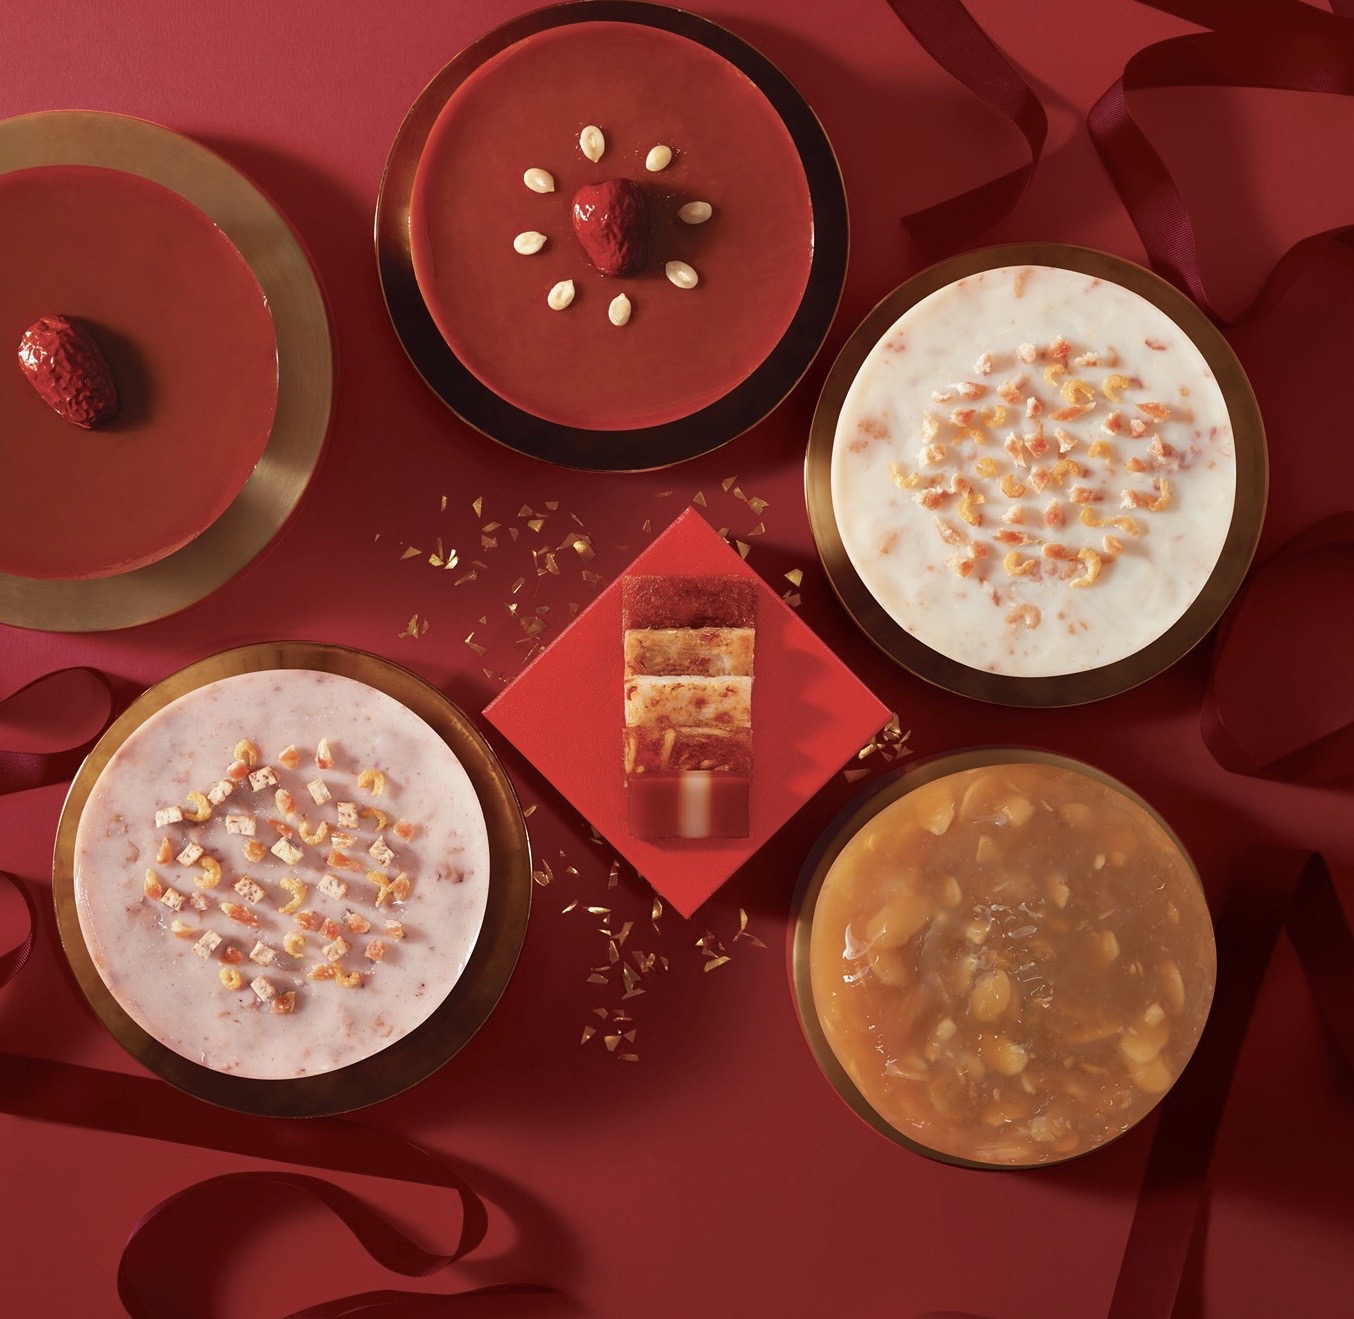 Exquisite Lunar New Year pudding curation